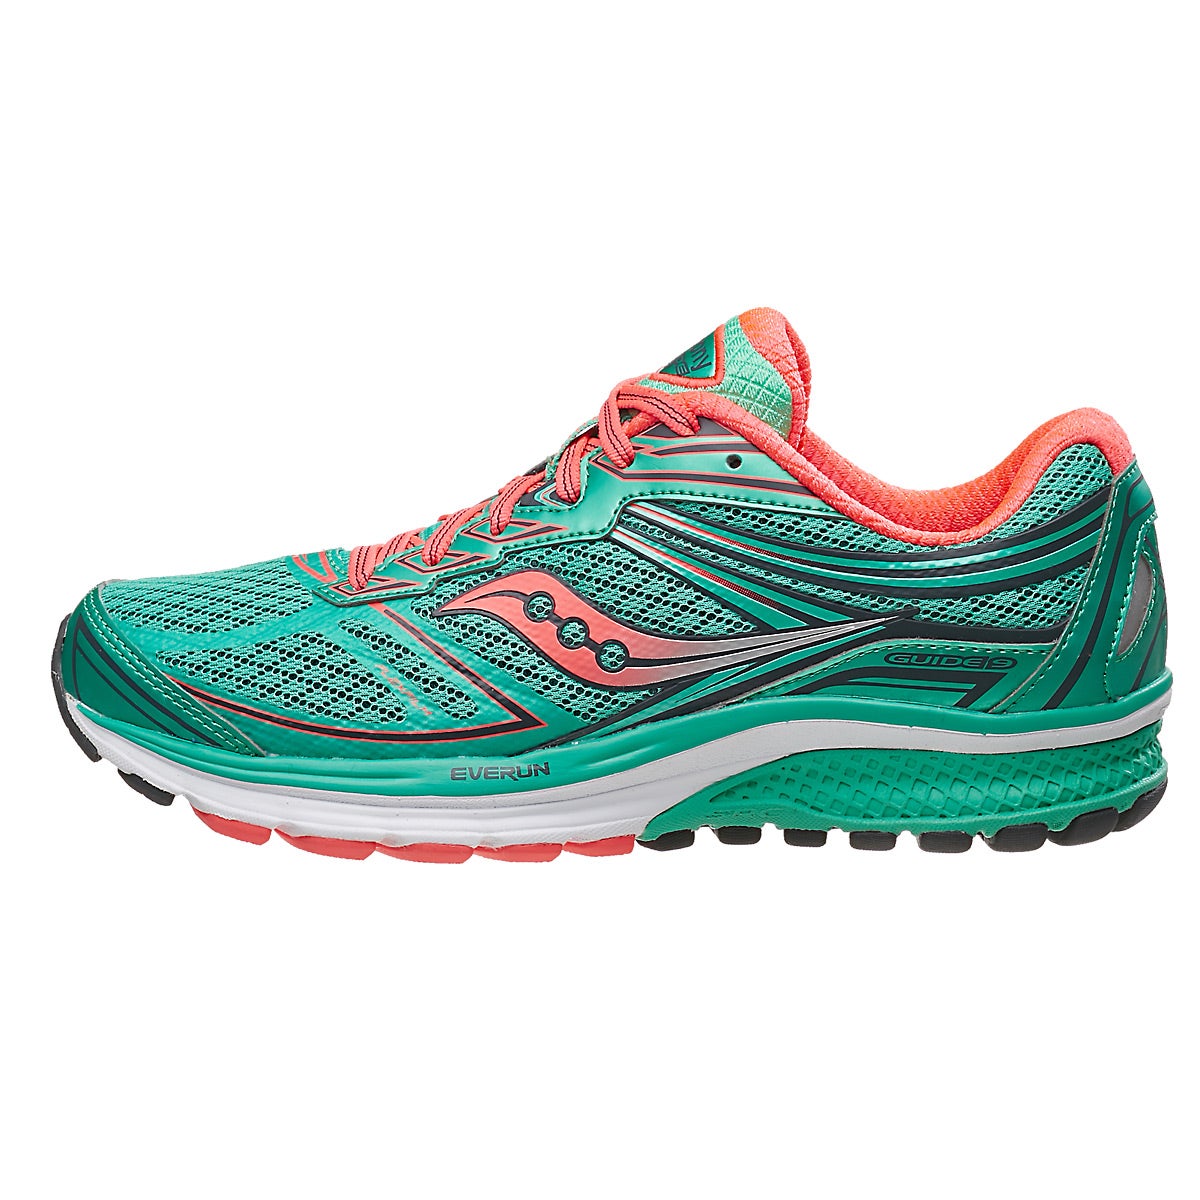 Saucony Guide 9 Women's Shoes Teal 